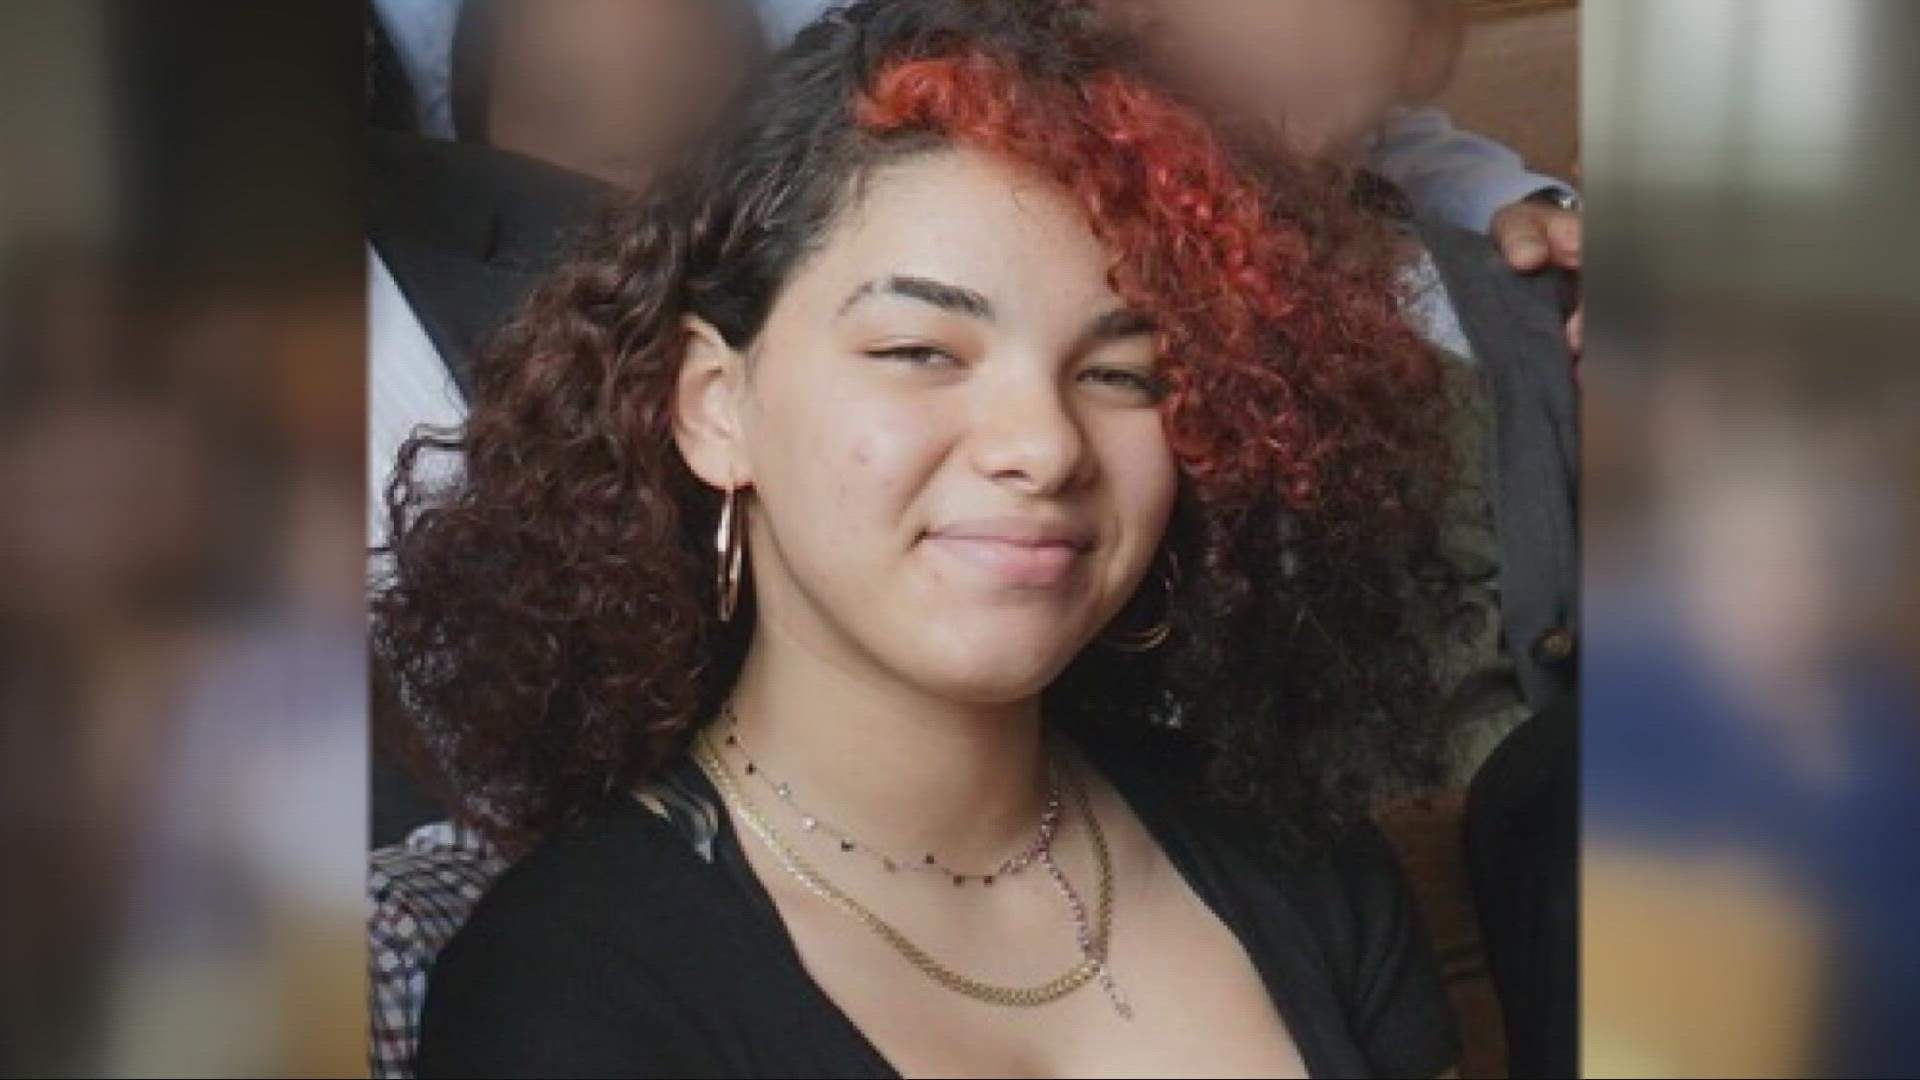 Police say 15-year-old Jaiden Renas was found shot to death in a car left in a field on the city's west side last week.